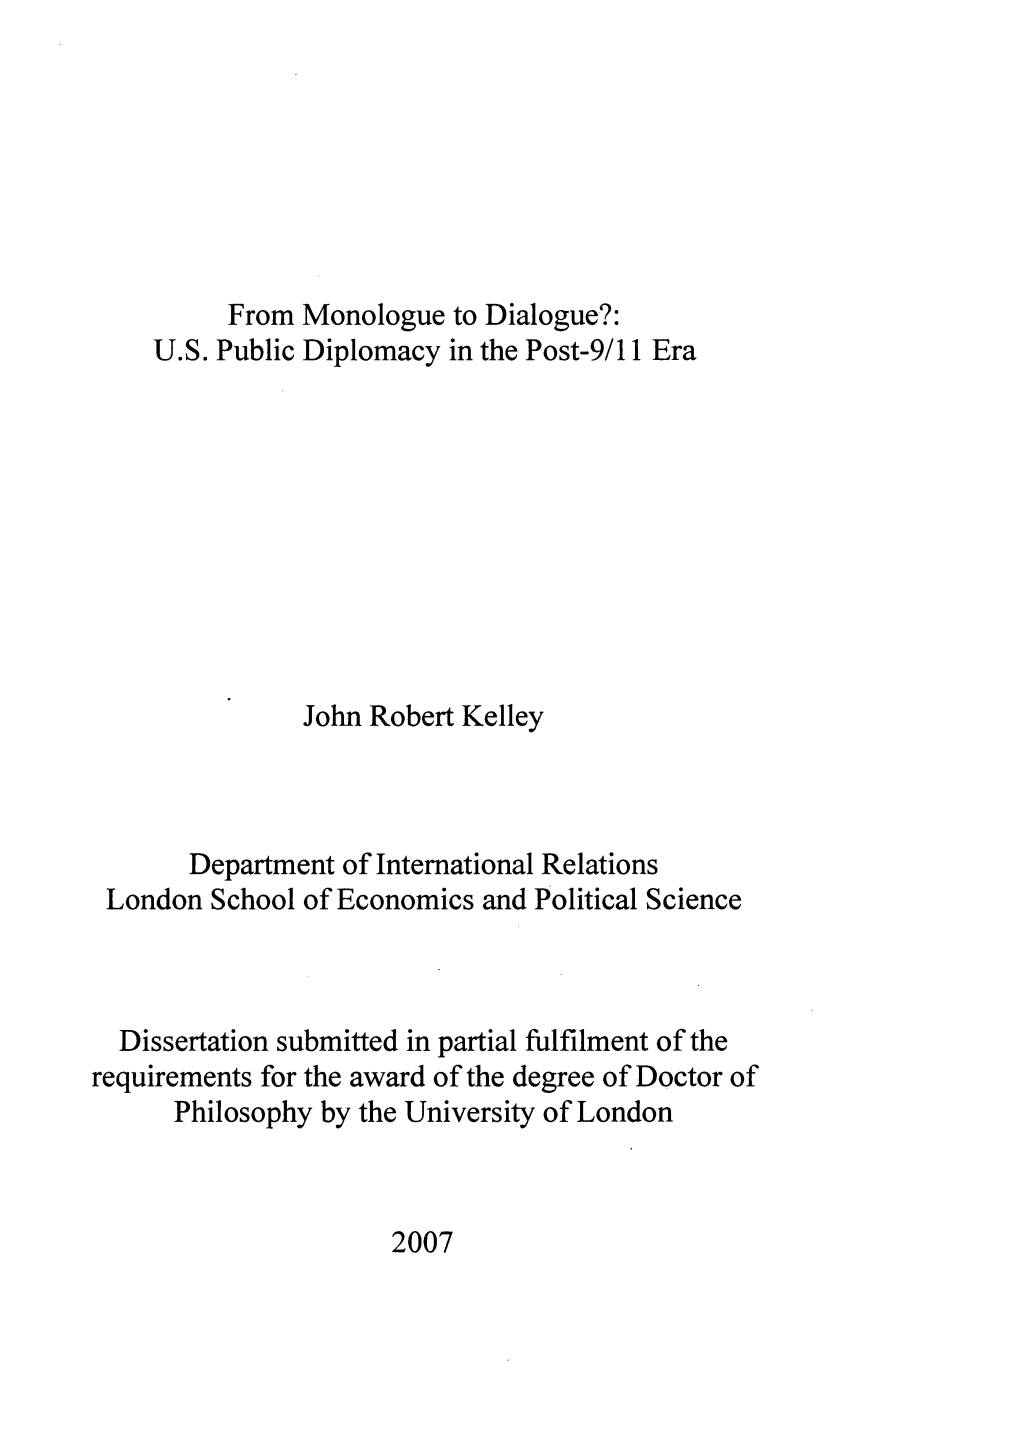 From Monologue to Dialogue?: U.S. Public Diplomacy in the Post-9/11 Era